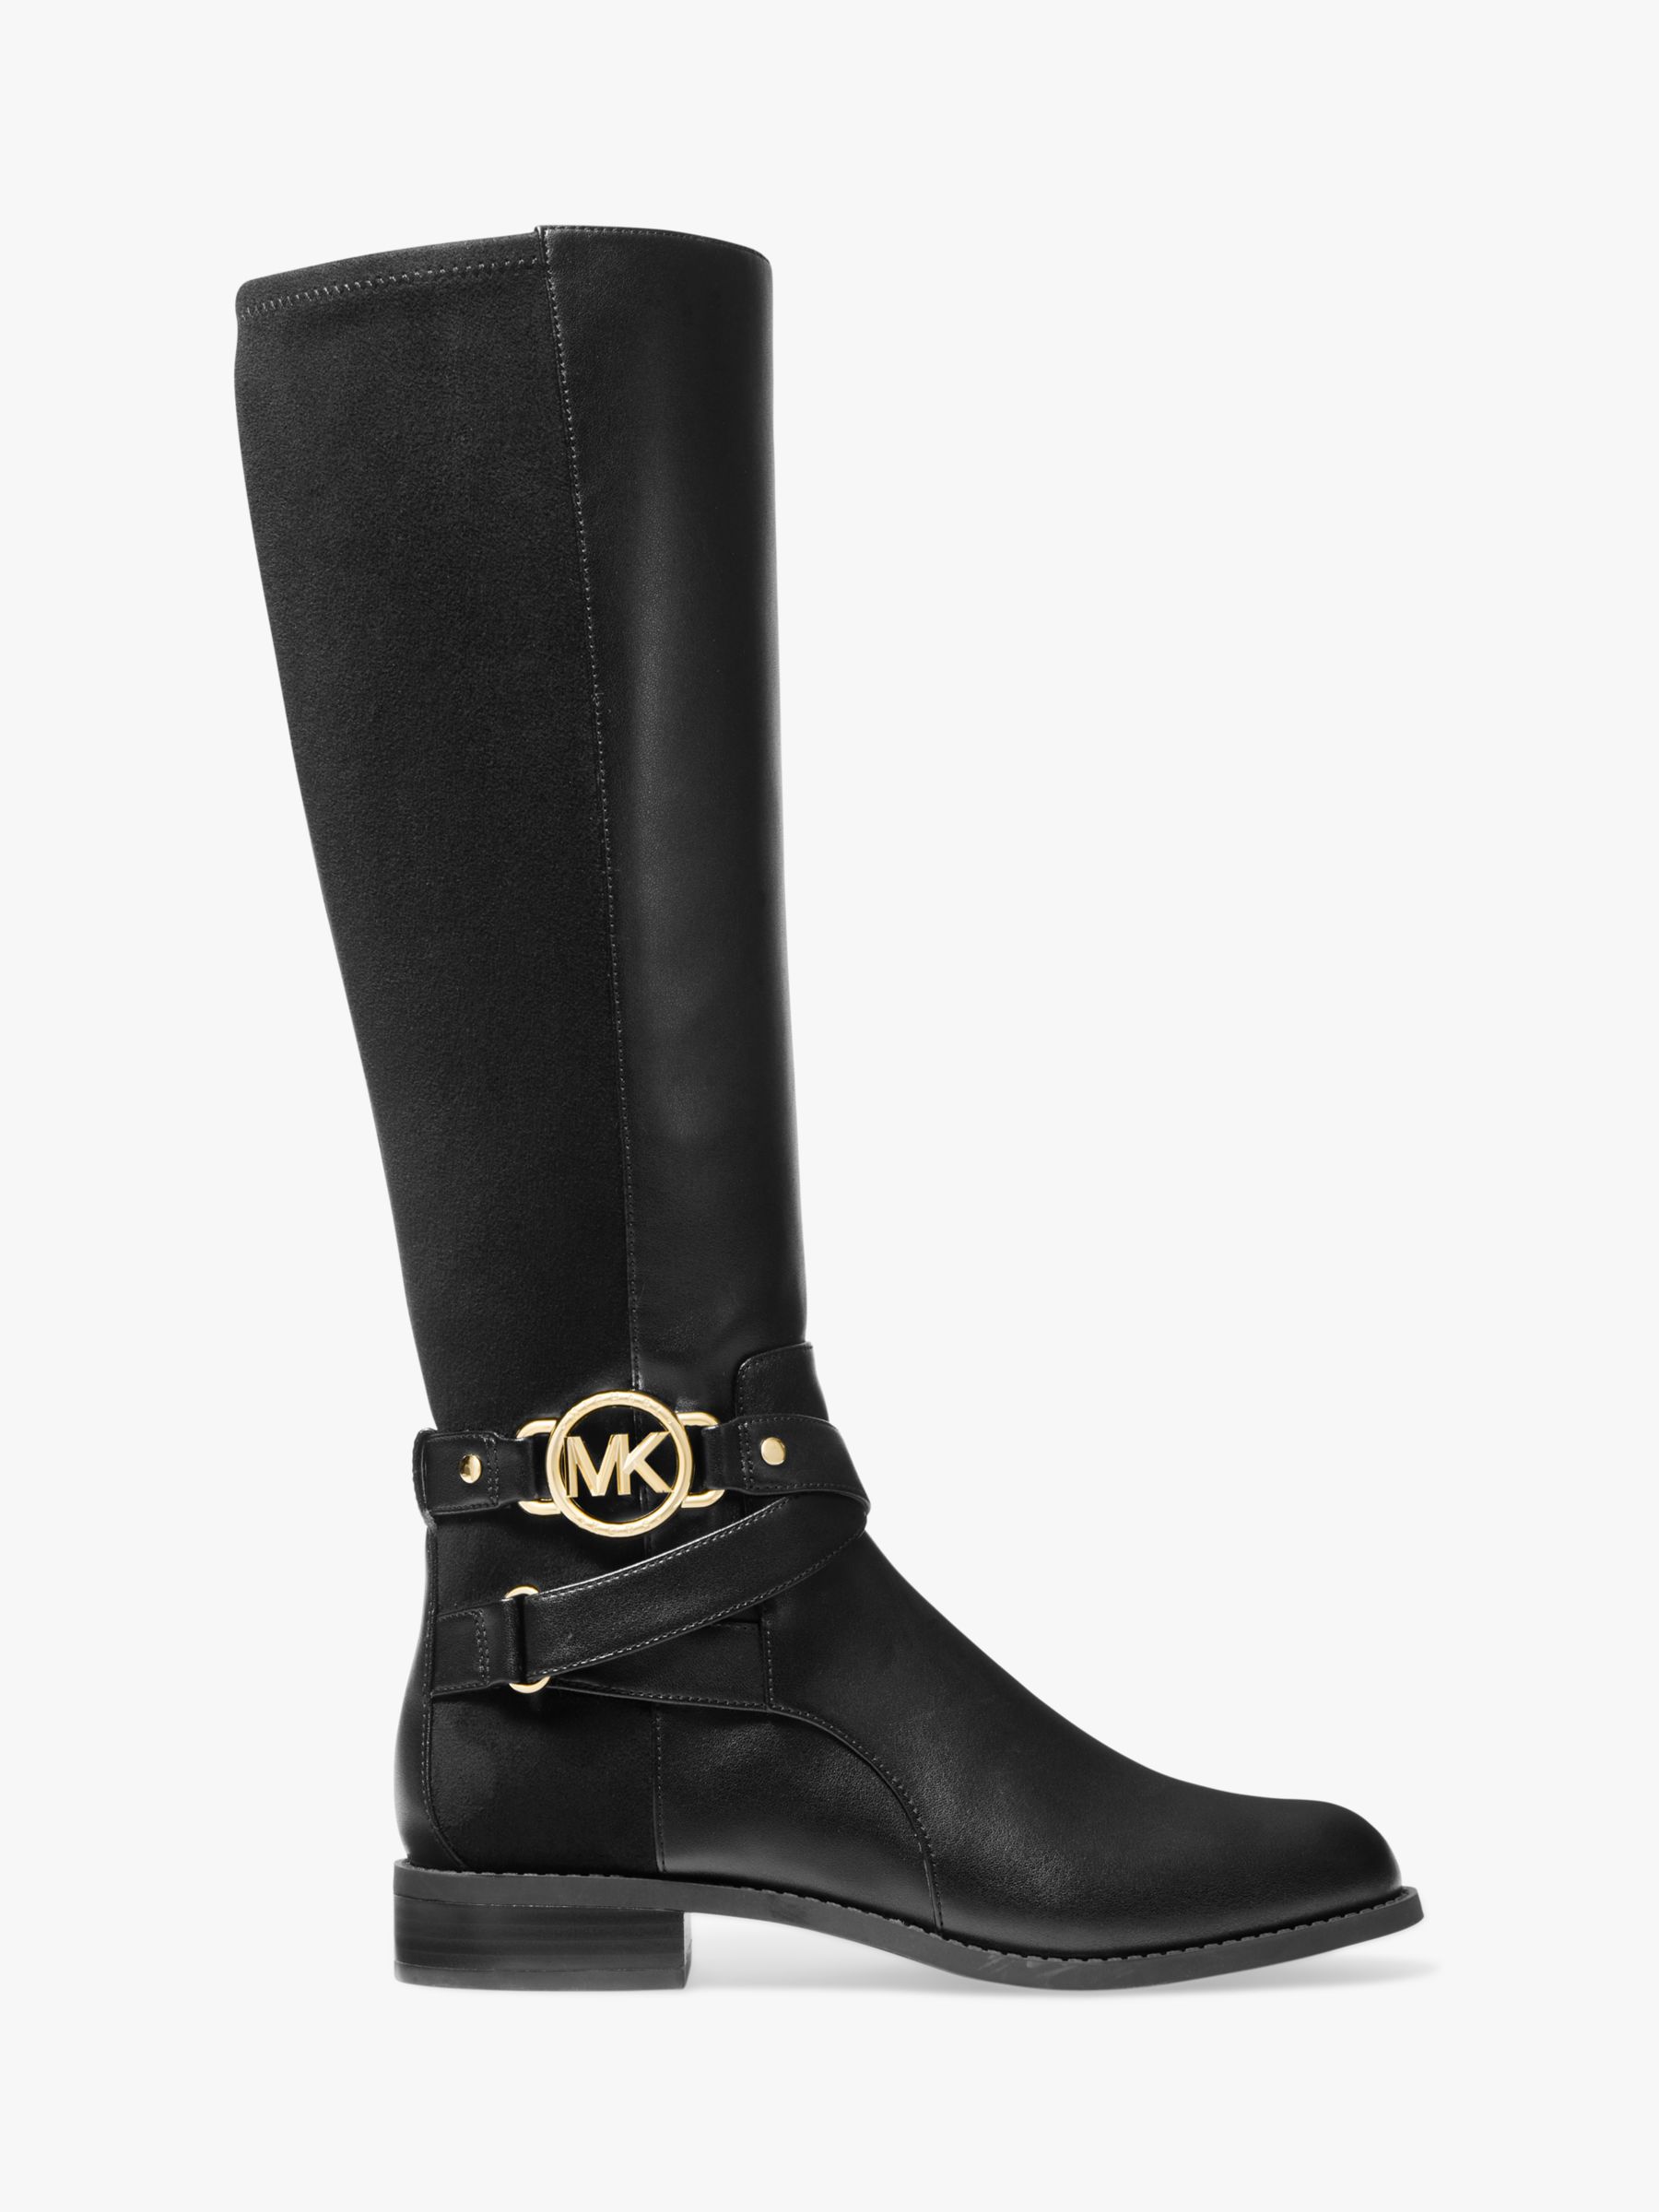 Michael Kors Rory Leather Knee High Boots